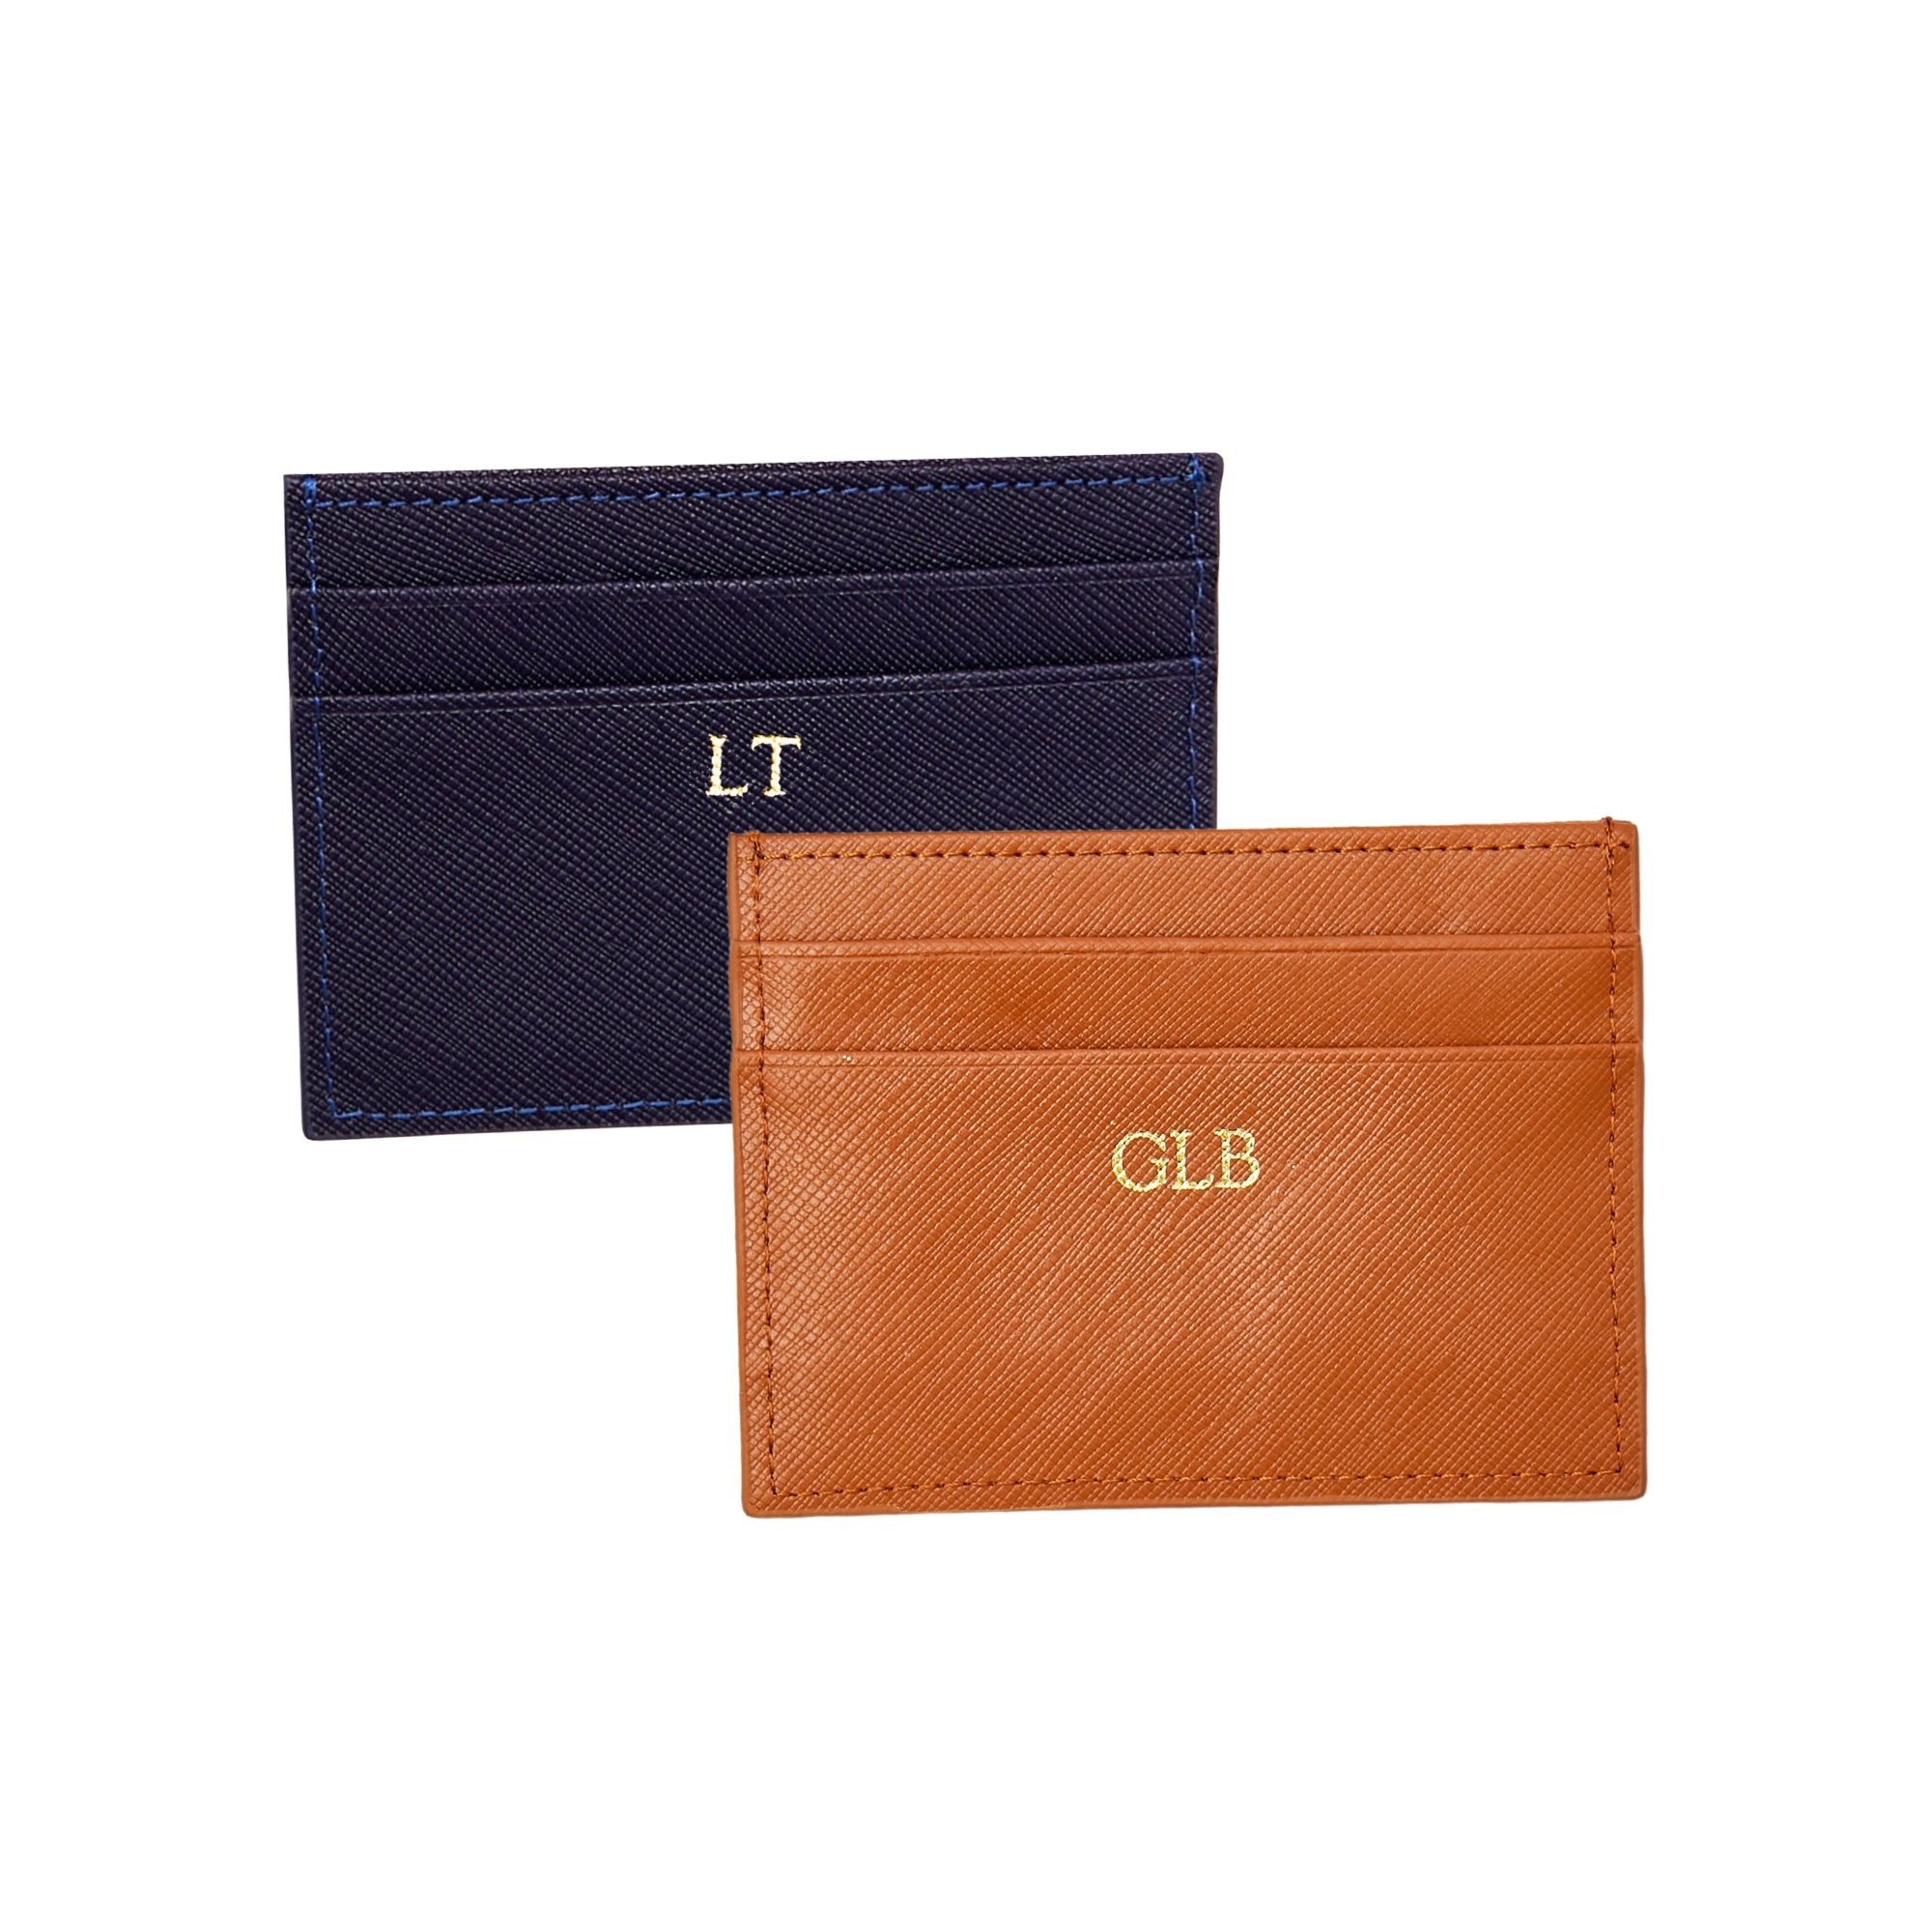 Leather cardholders customized with golden monograms